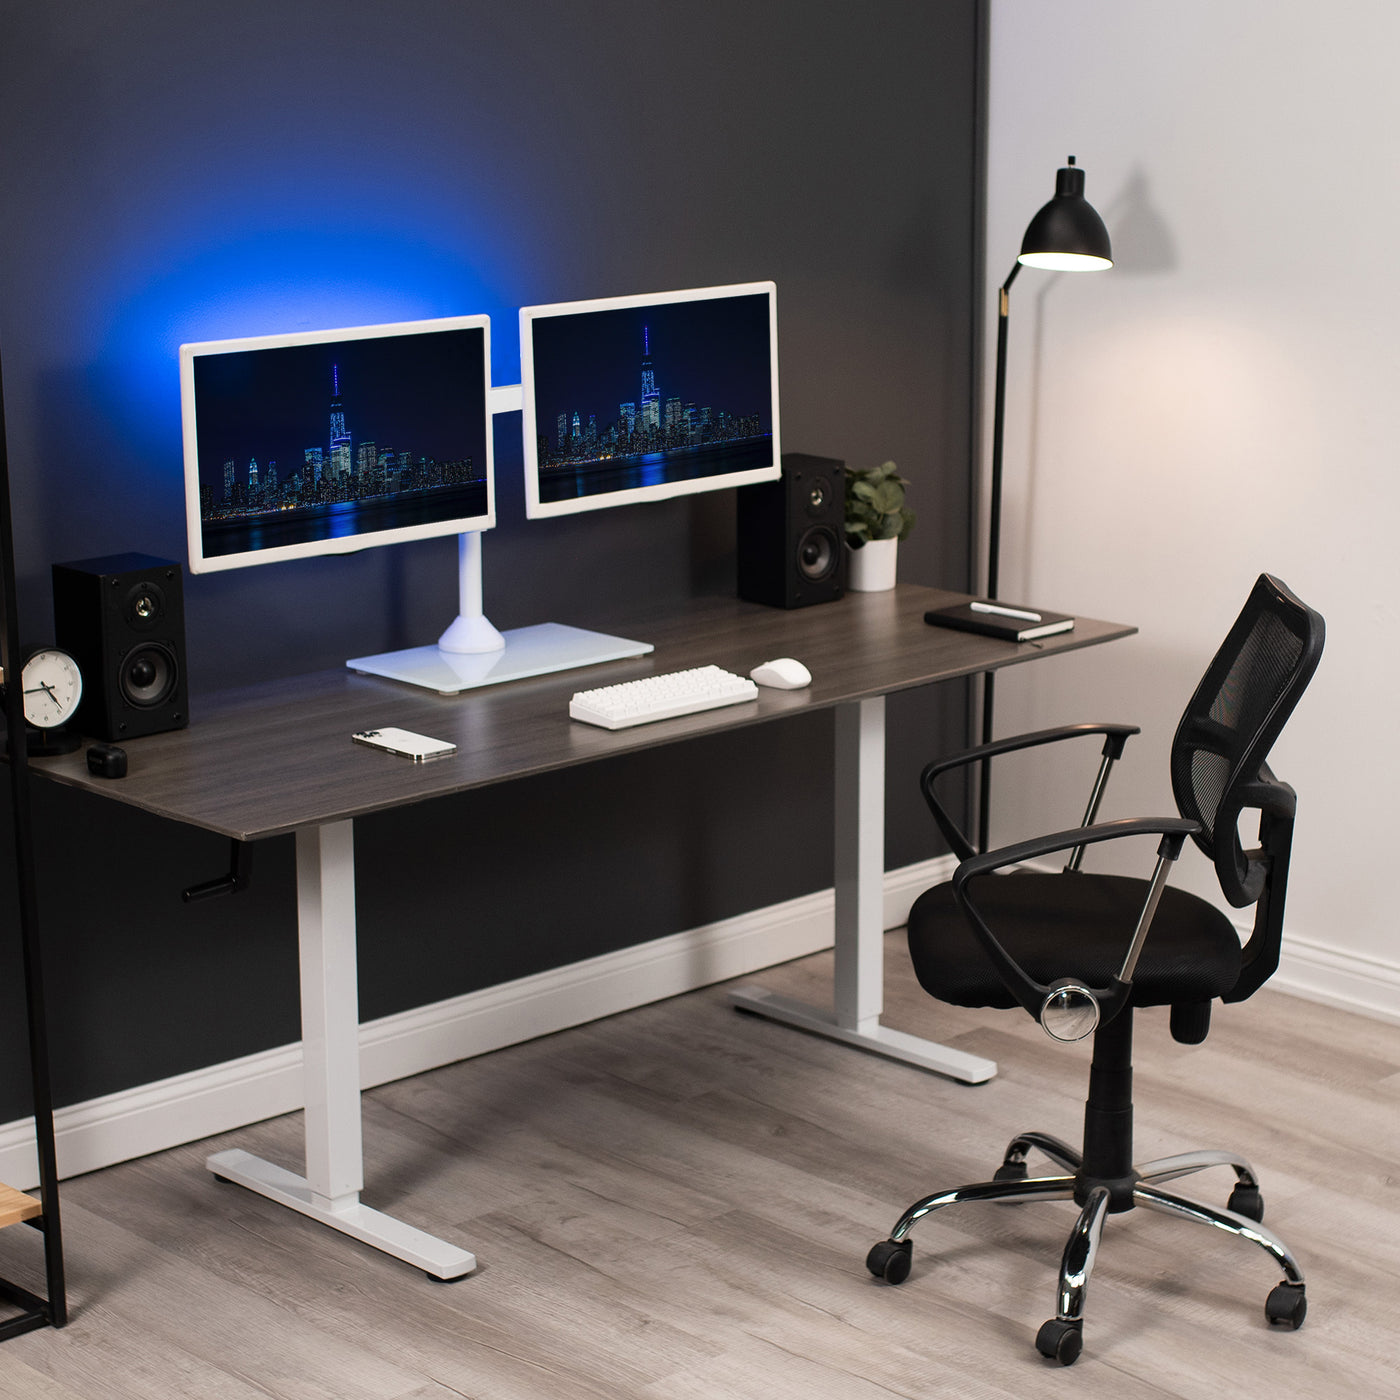 Enhance your work day with this high-grade steel stand built for scratch resistance and security. Designed with user-geared features such as arm articulation, removable VESA mounting plates, adjustable monitor height, integrated cable management, and more, this mount is customizable to your particular office needs.